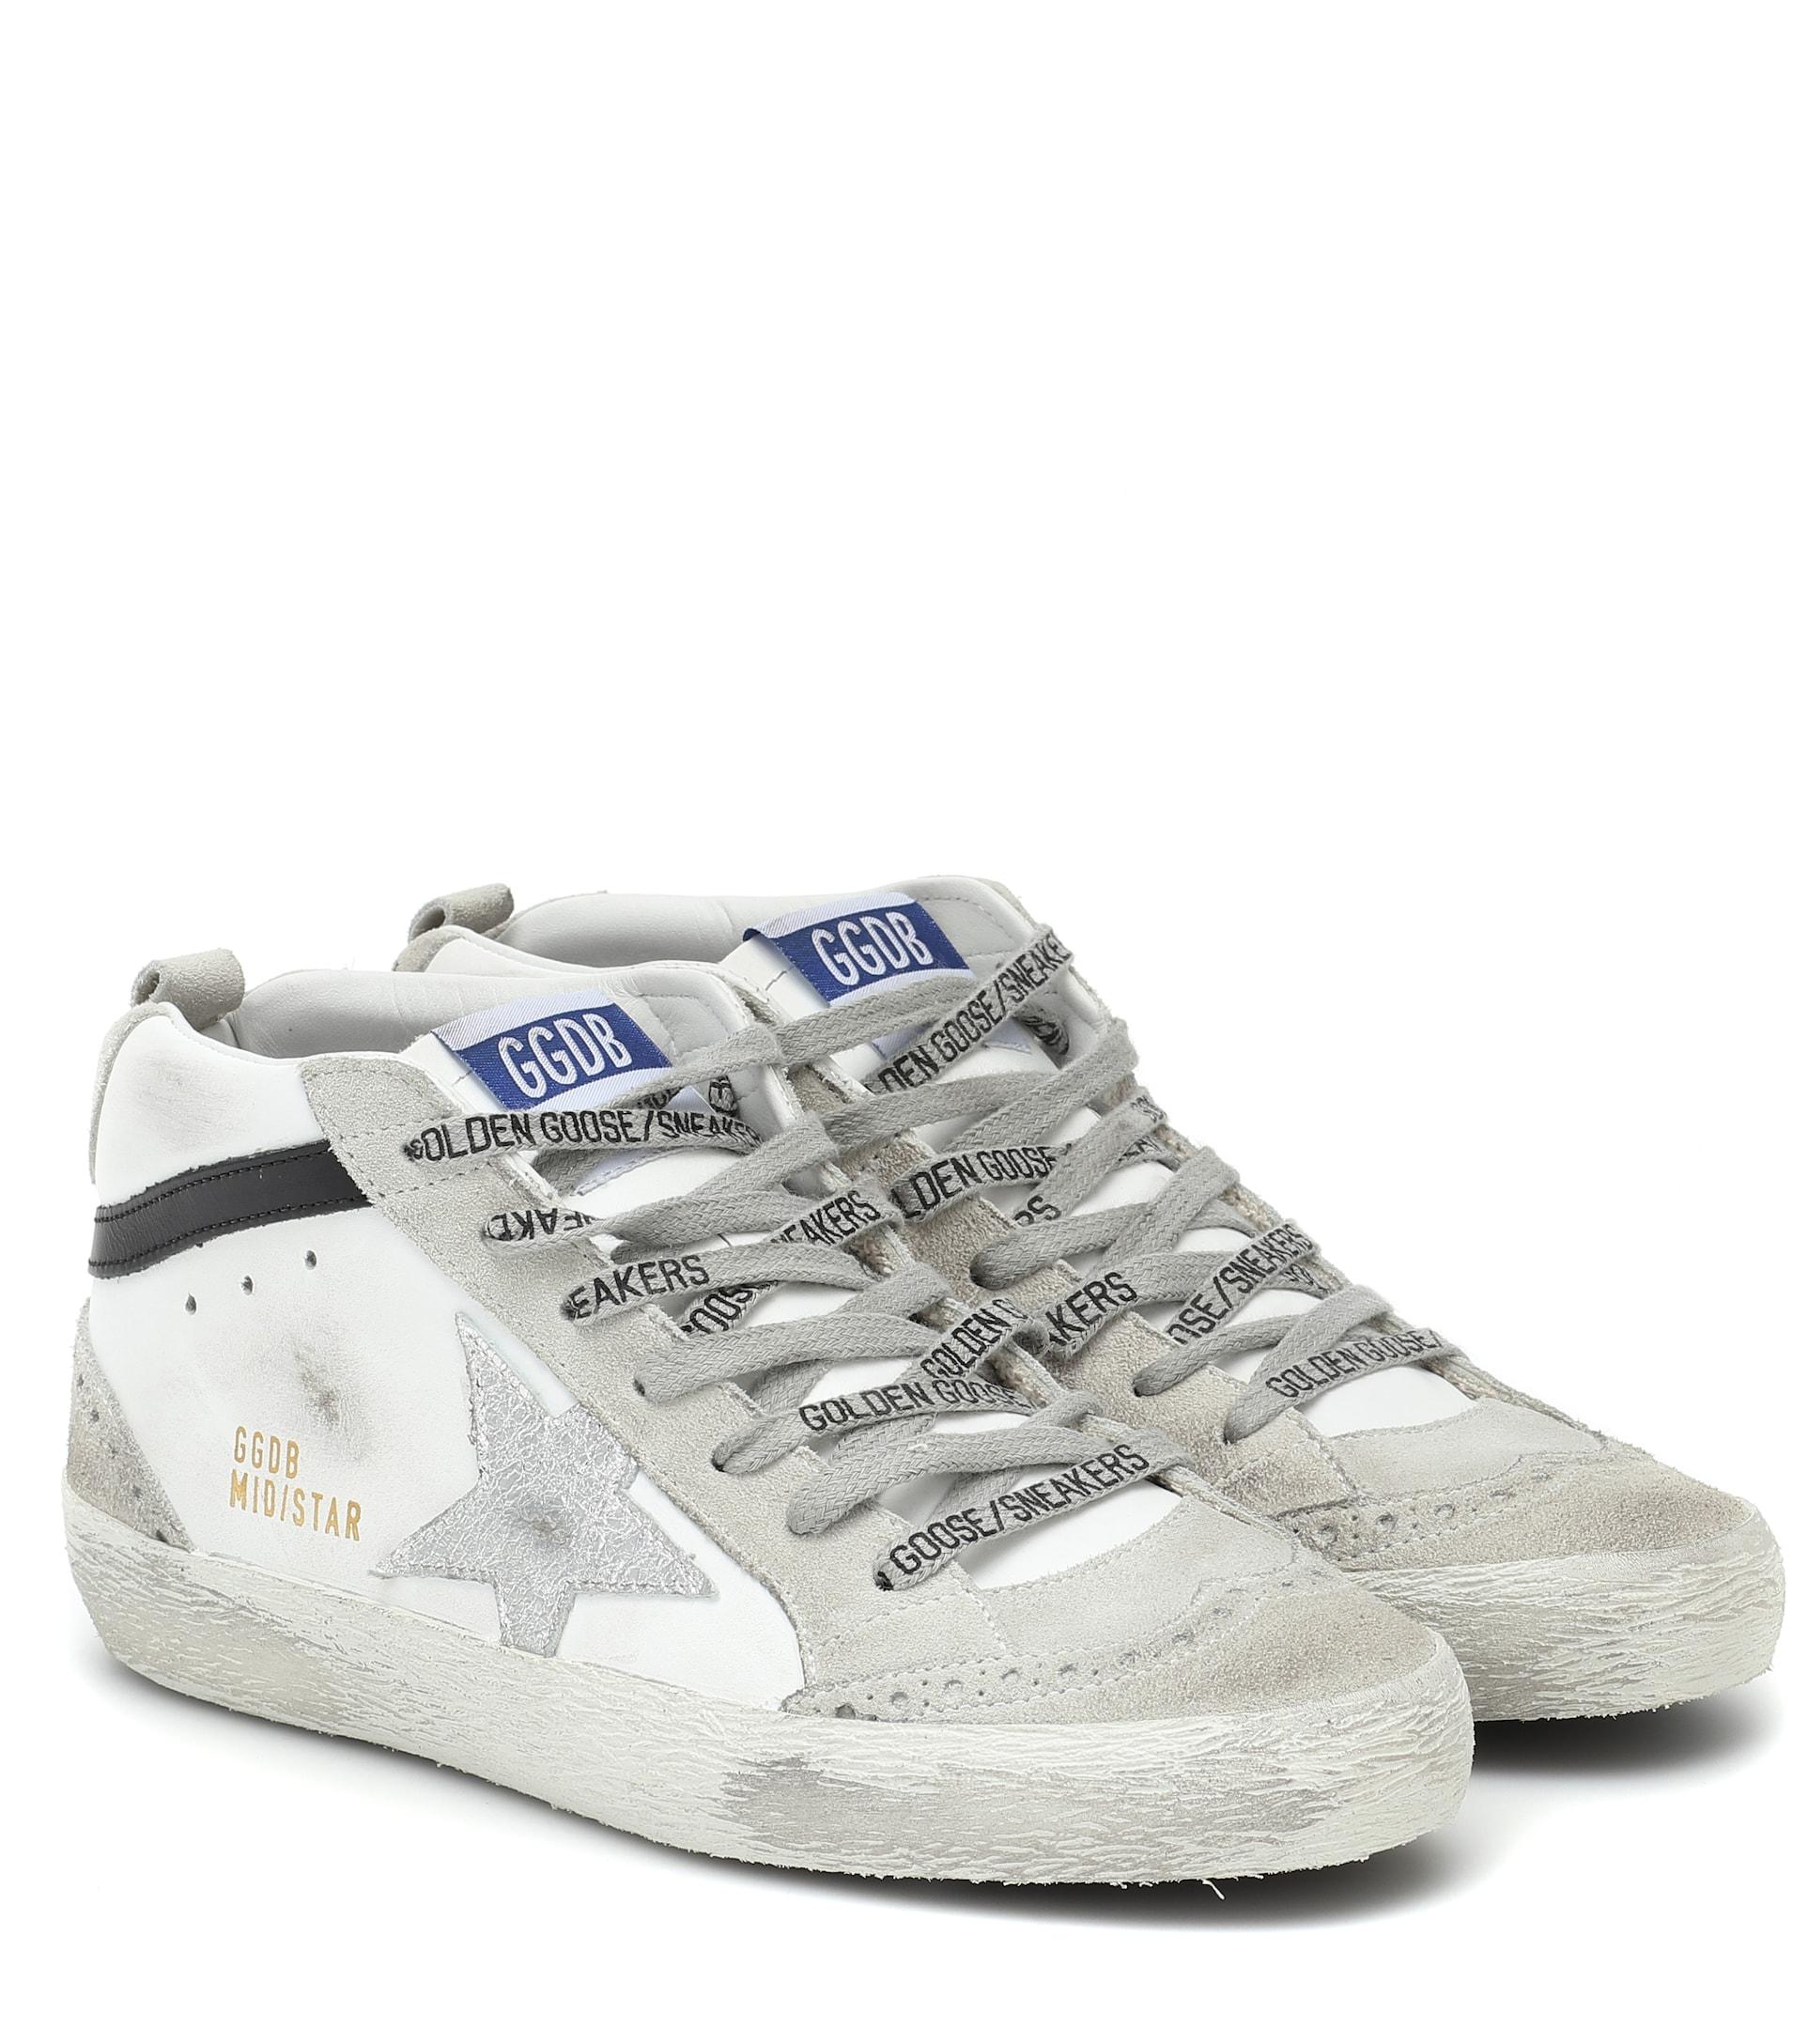 Golden Goose Mid Star Leather Sneakers in White | Lyst